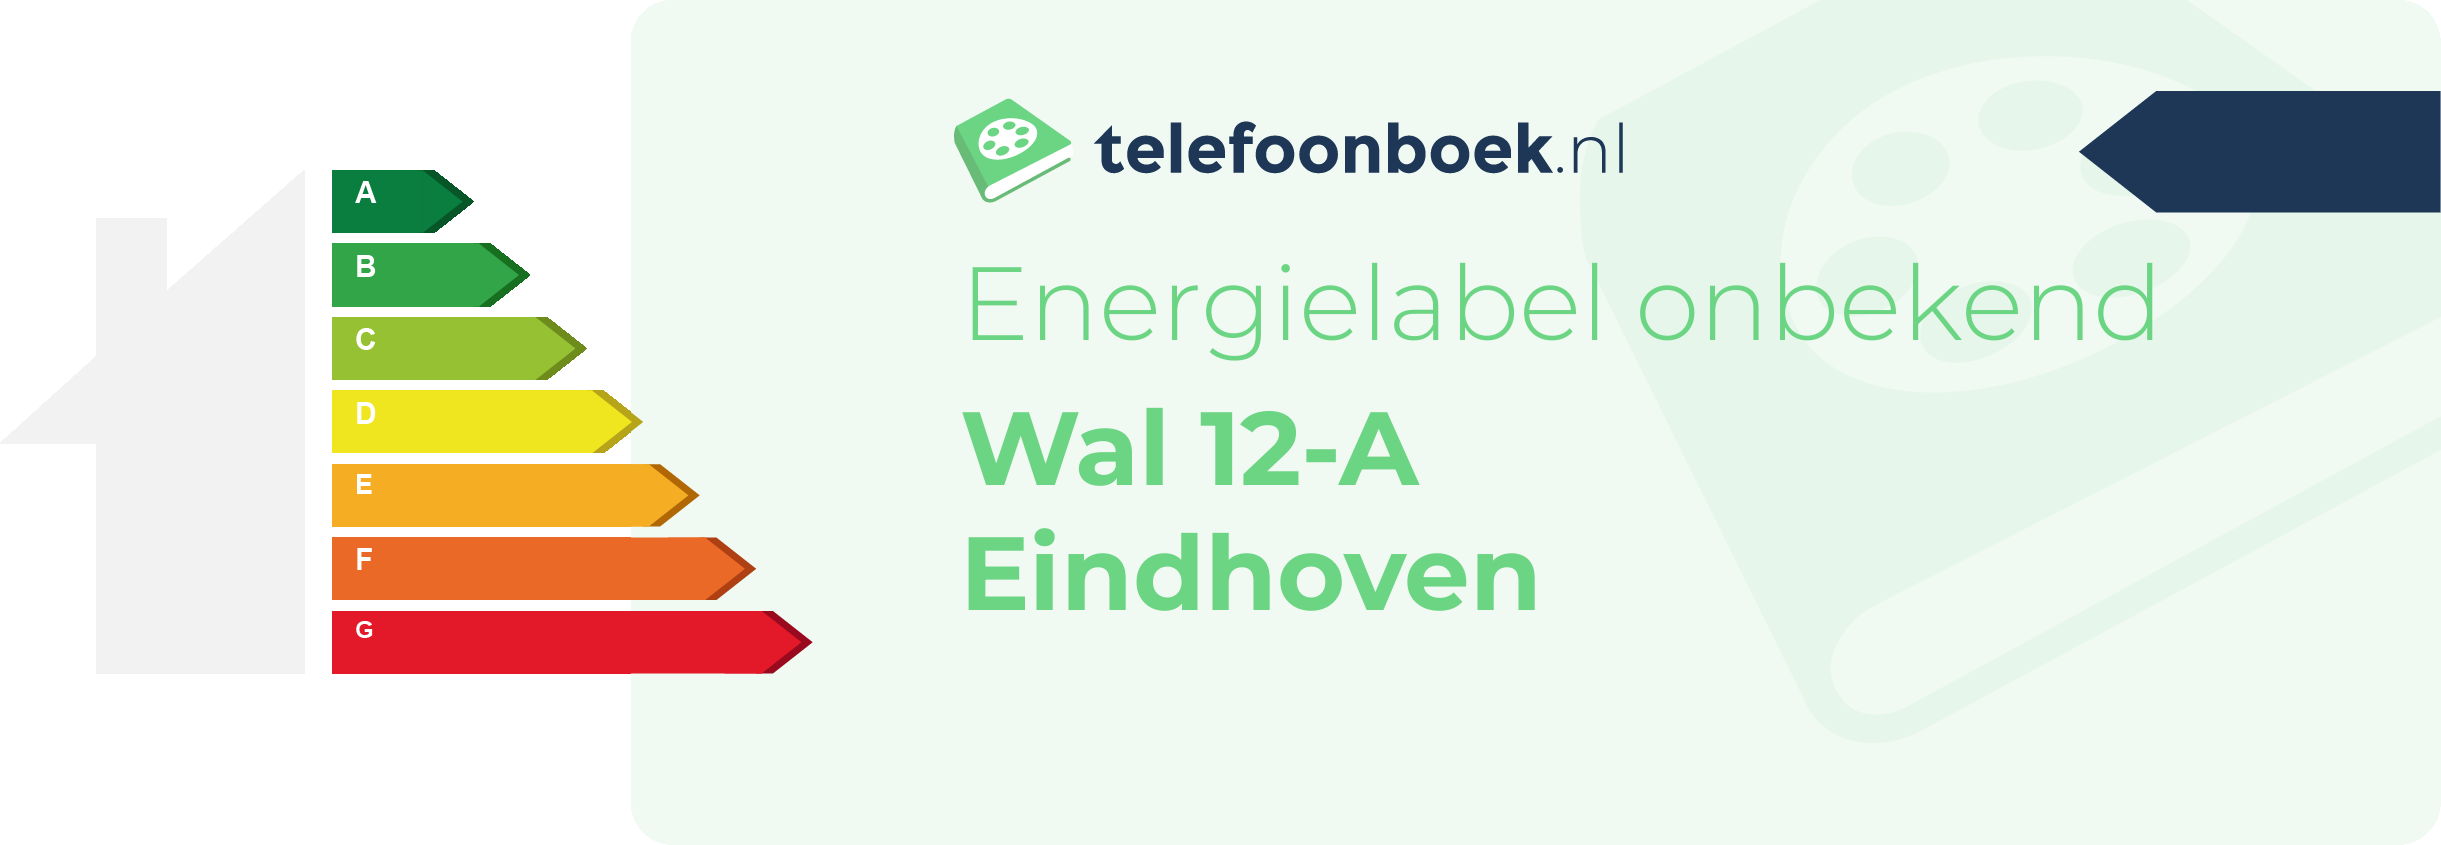 Energielabel Wal 12-A Eindhoven